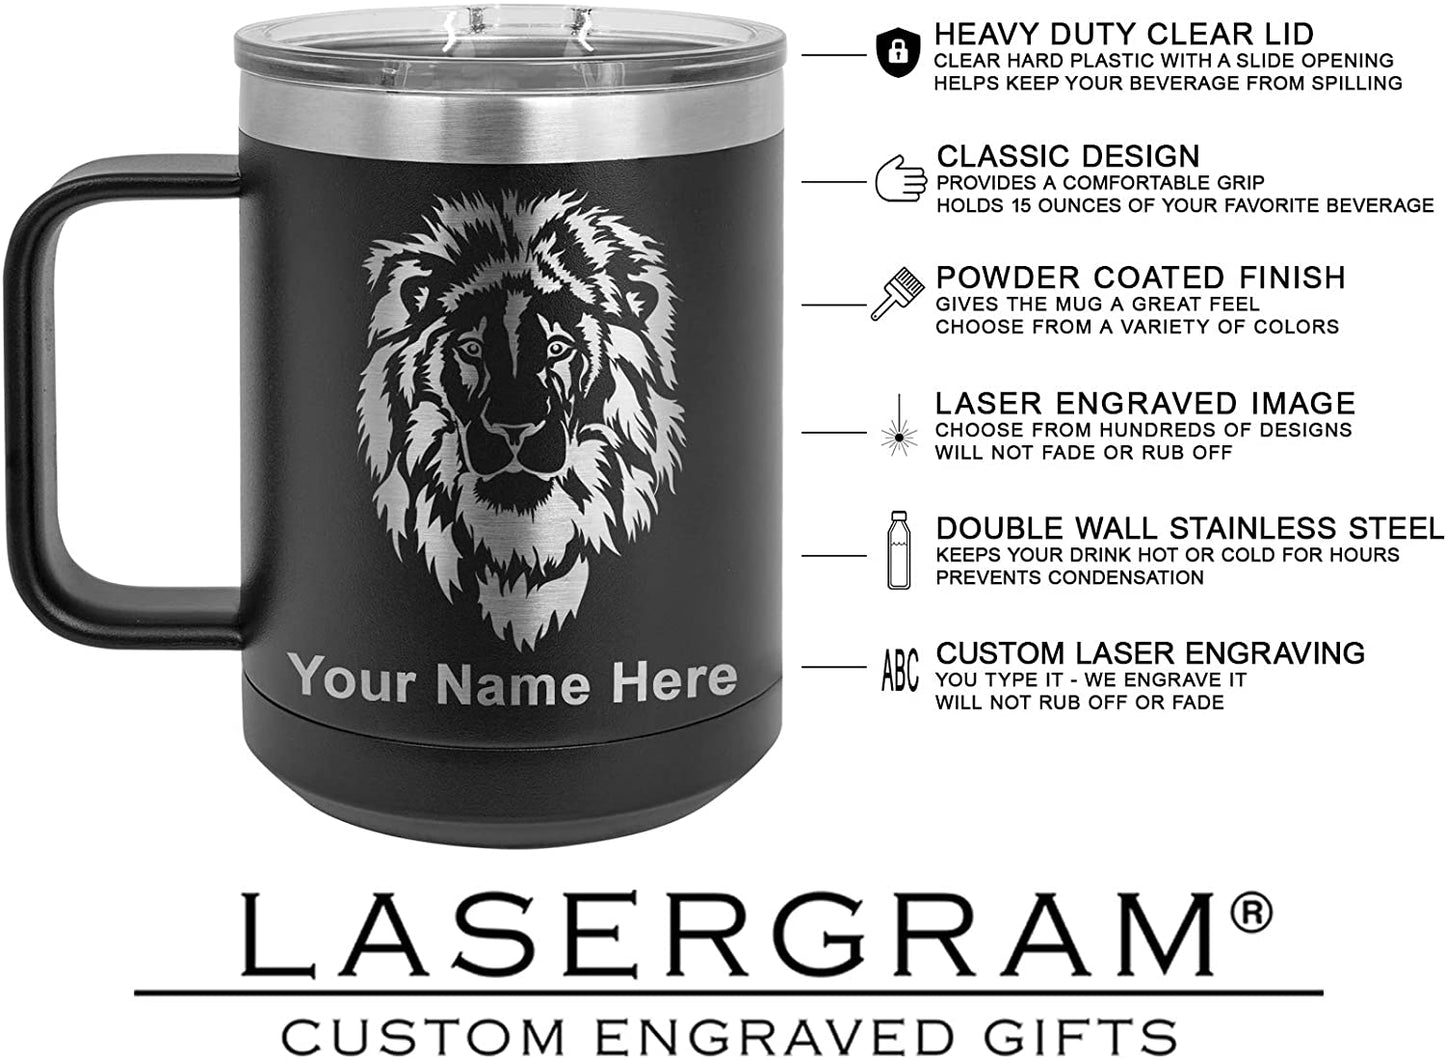 15oz Vacuum Insulated Coffee Mug, Farm Tractor, Personalized Engraving Included